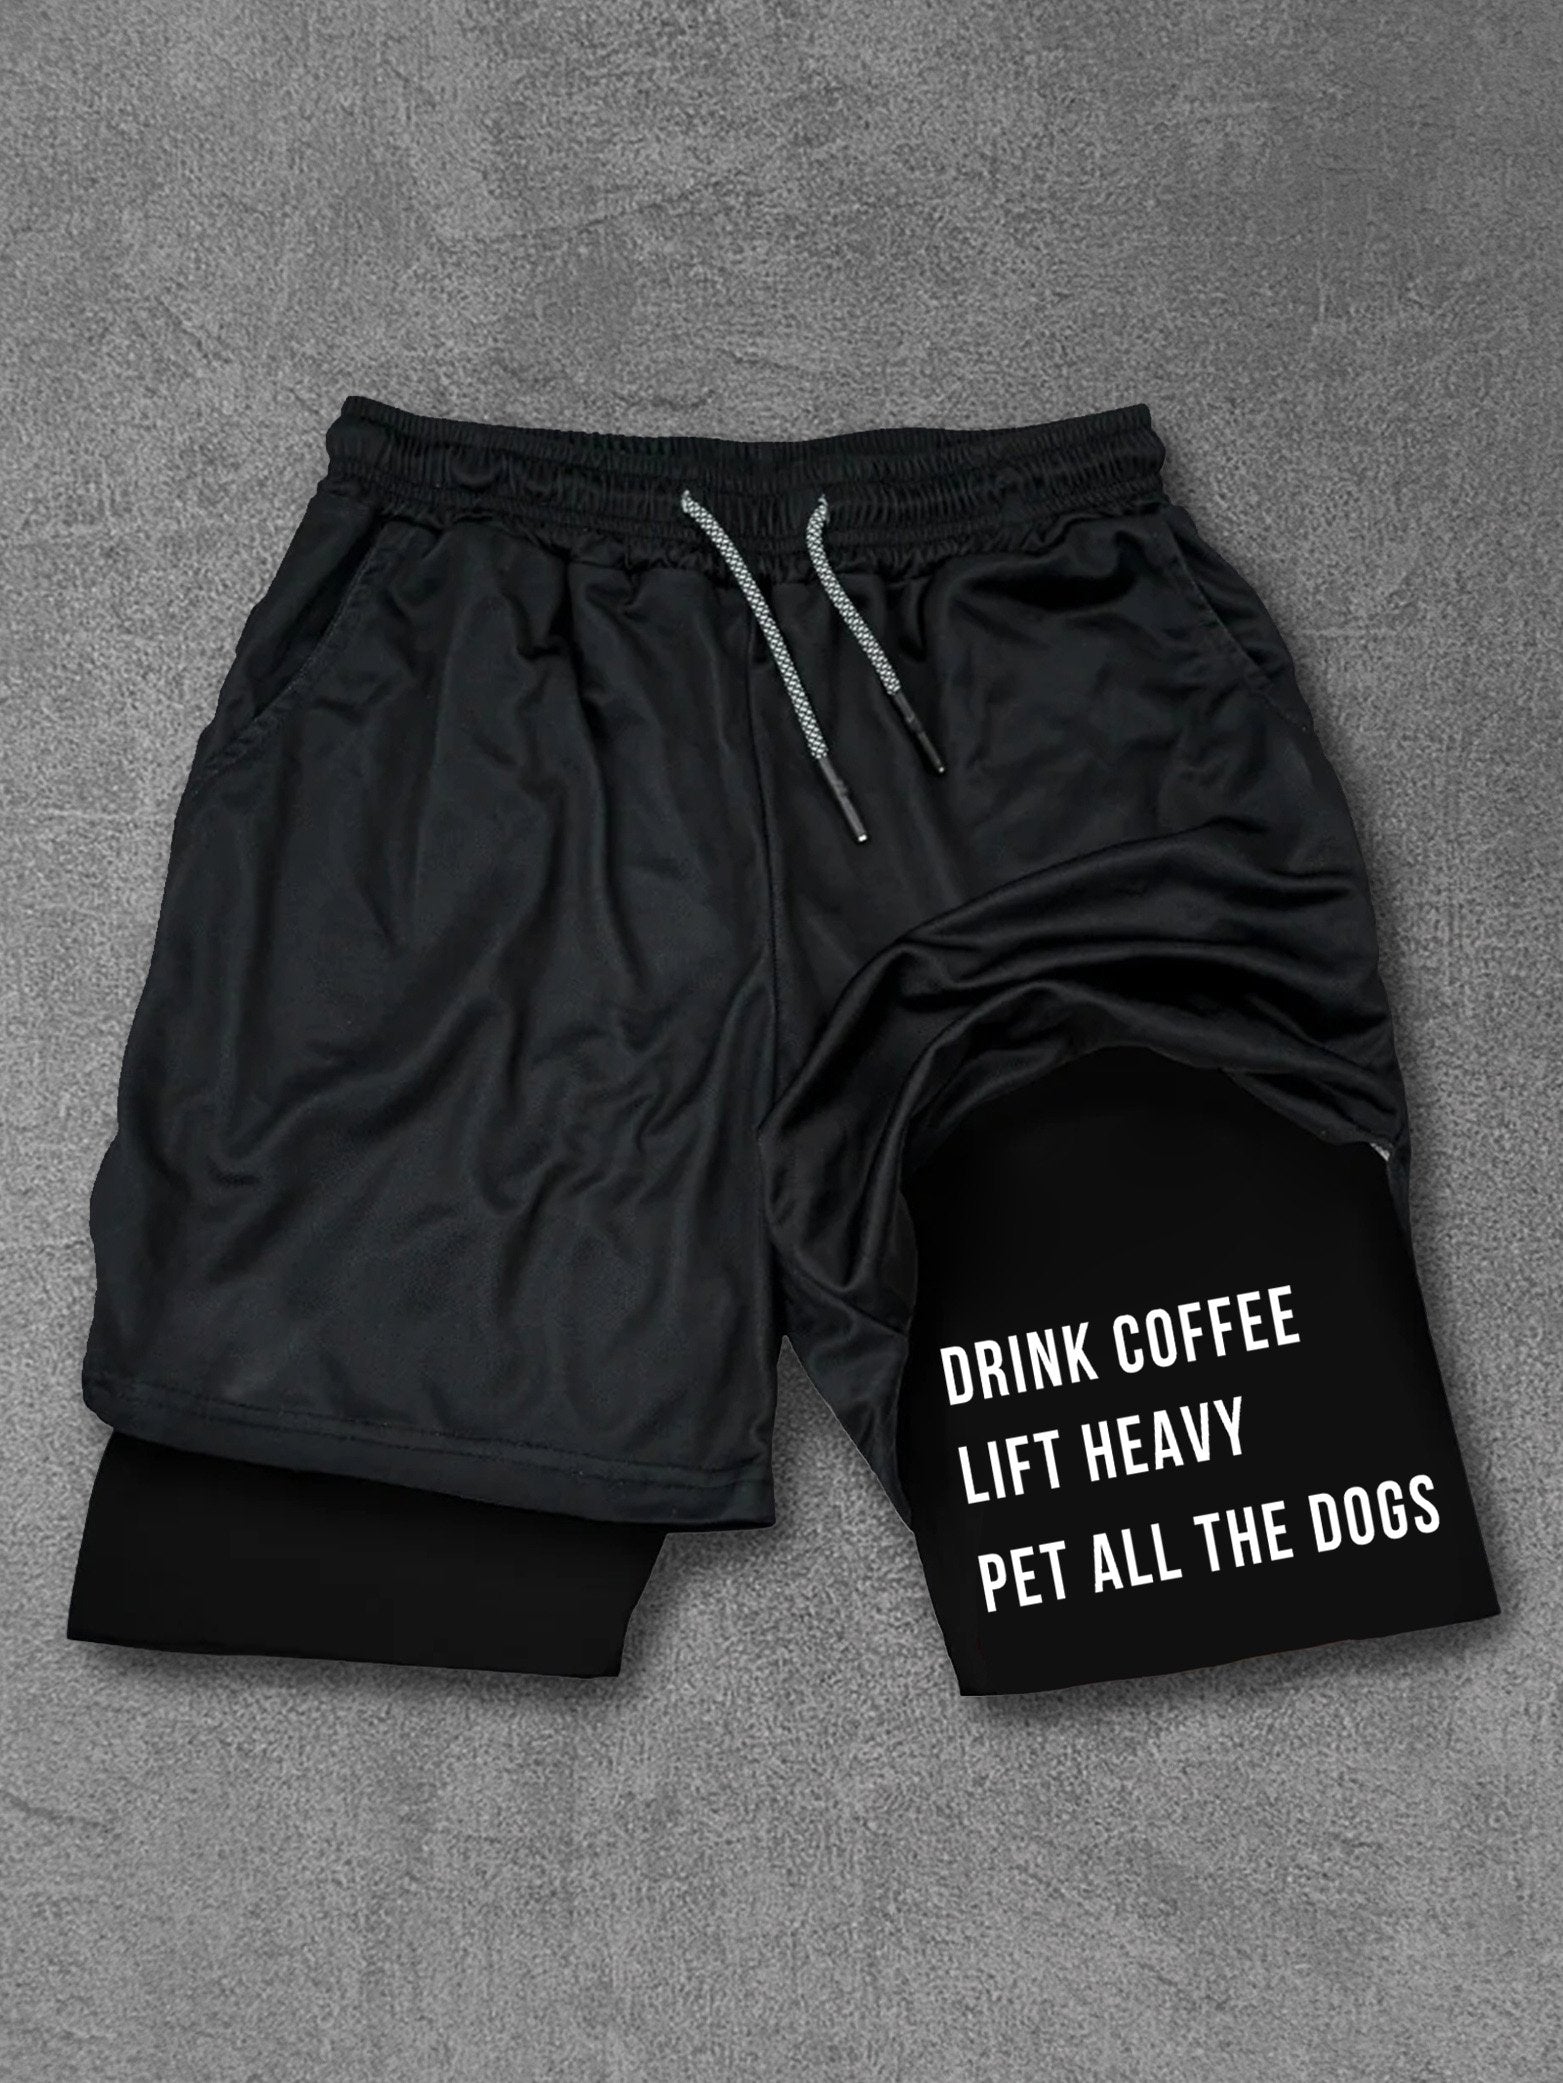 Drink coffee lift heavy pet all the dogs Performance Training Shorts